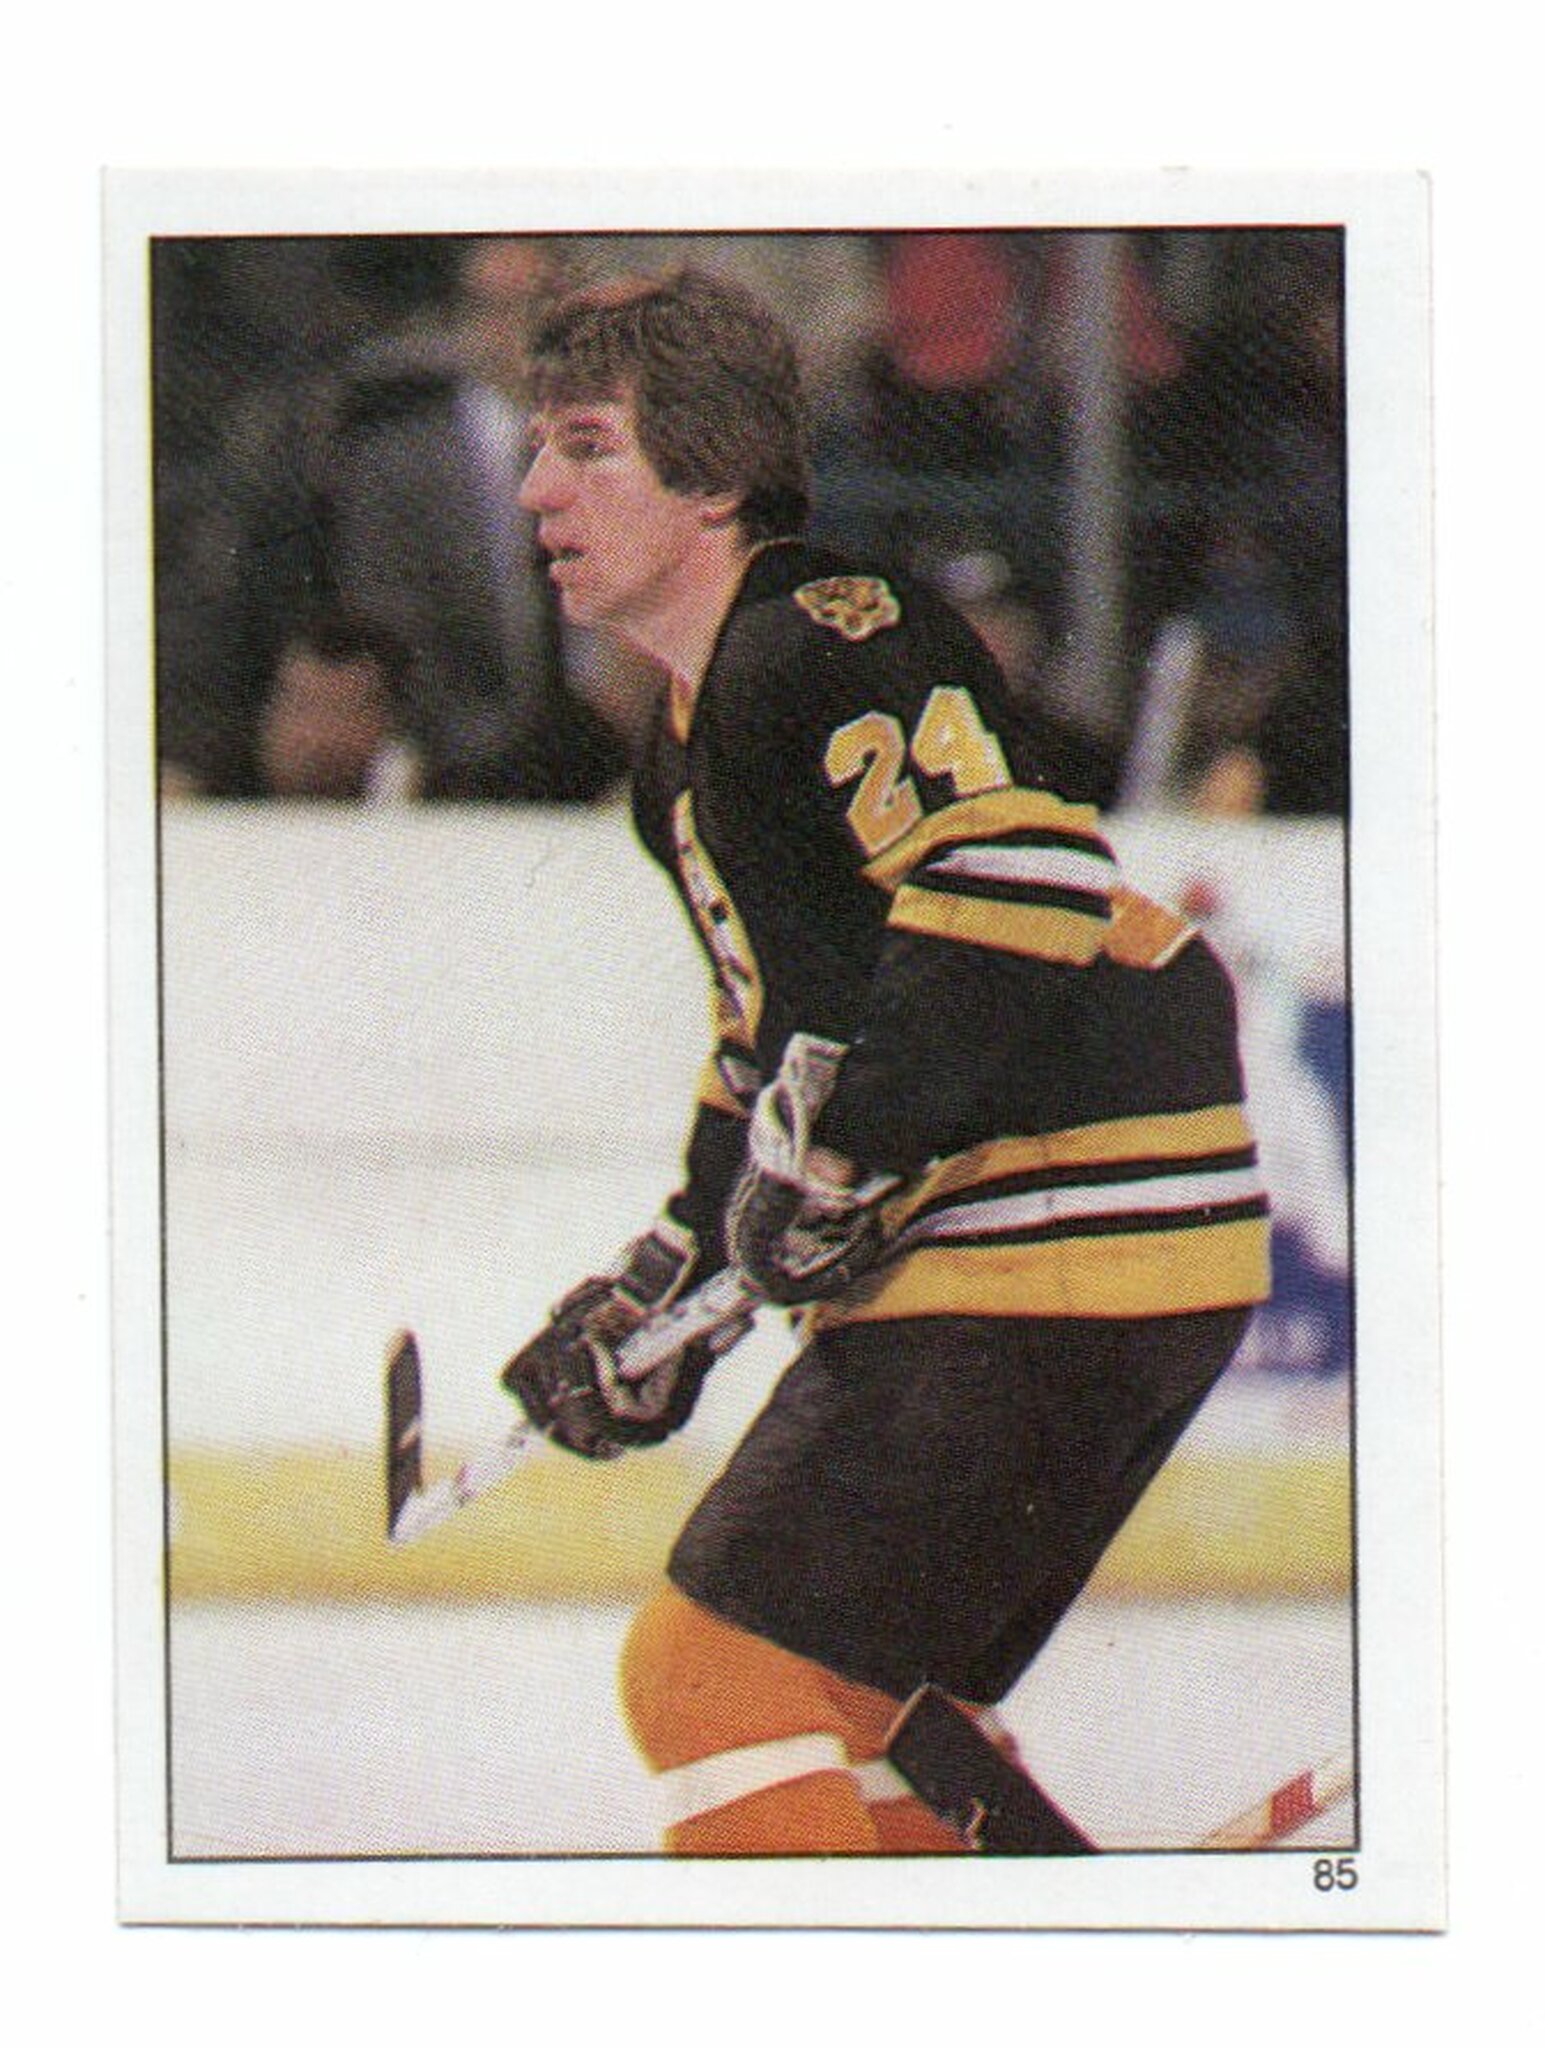 1982-83 Topps Stickers #85 Terry O'Reilly (5-X239-BRUINS)